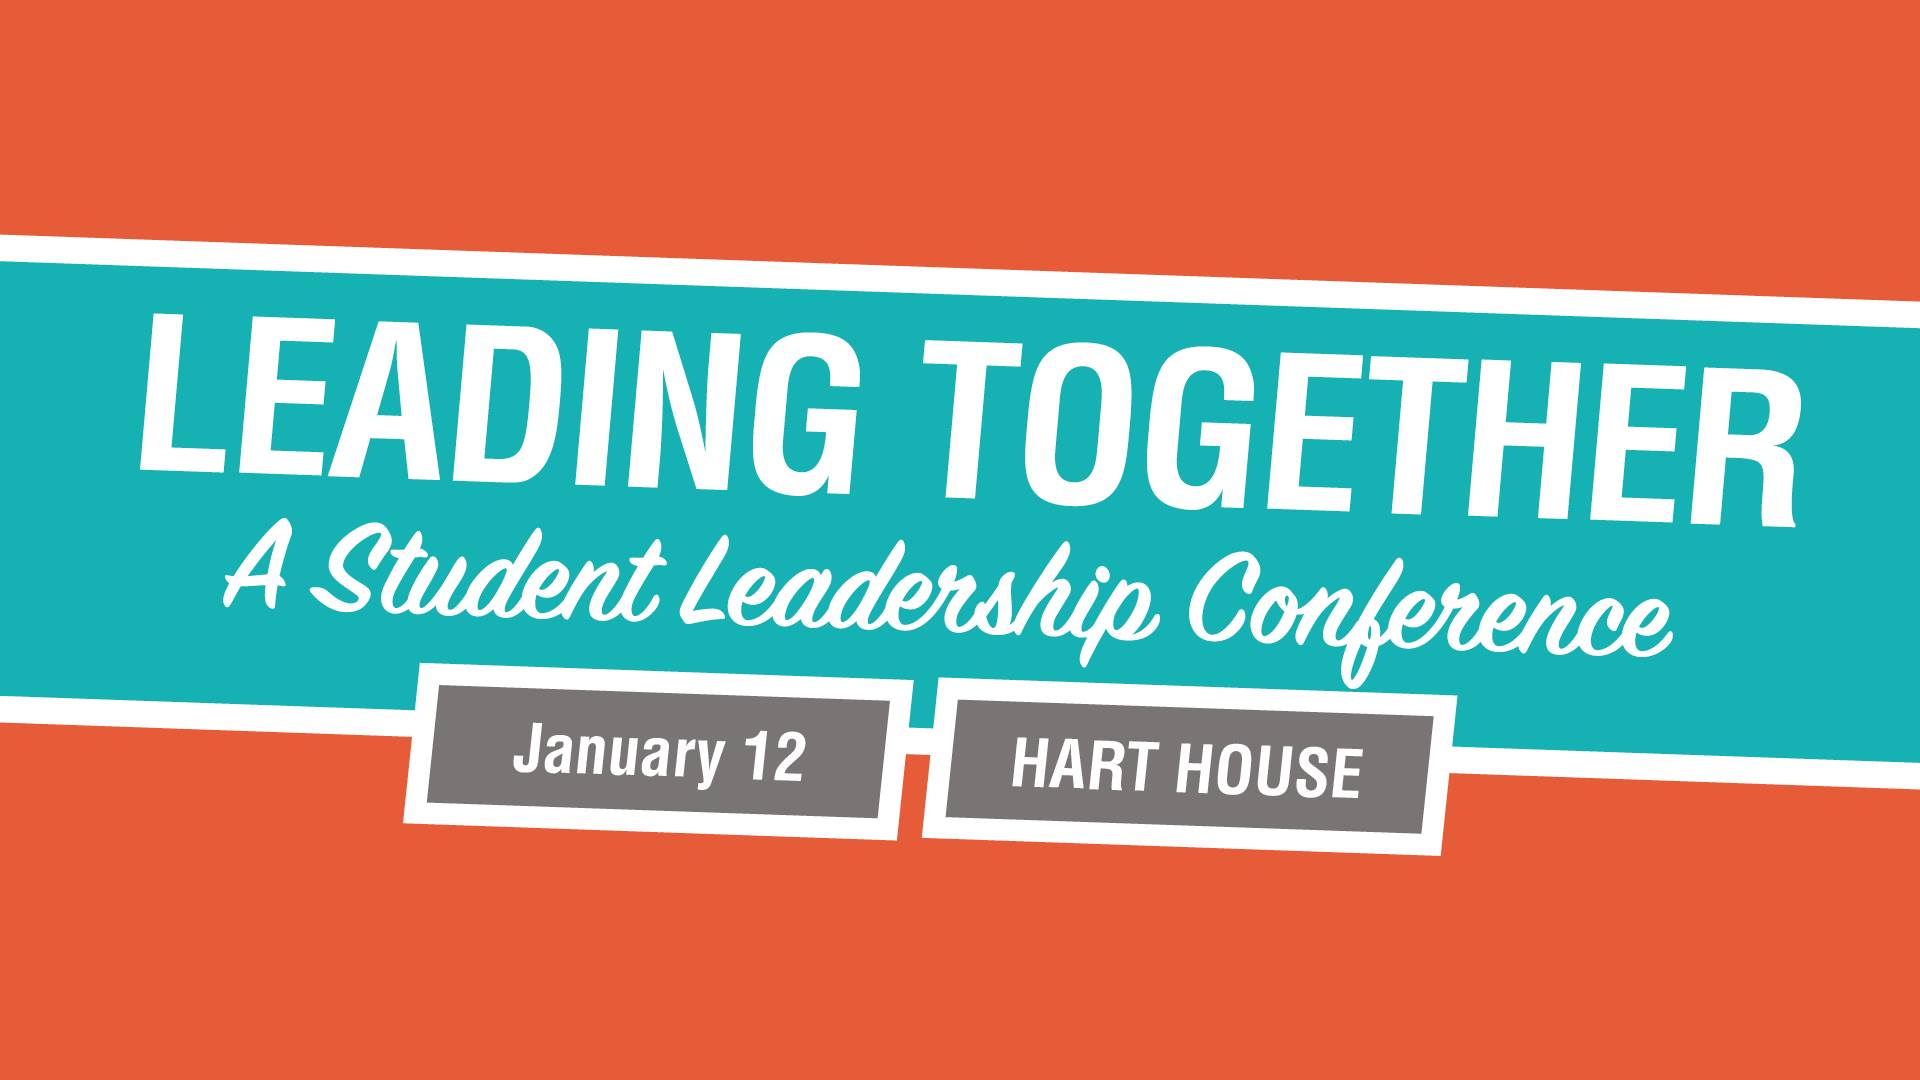 Leading Together: A student leadership conference, January 12 at Hart House